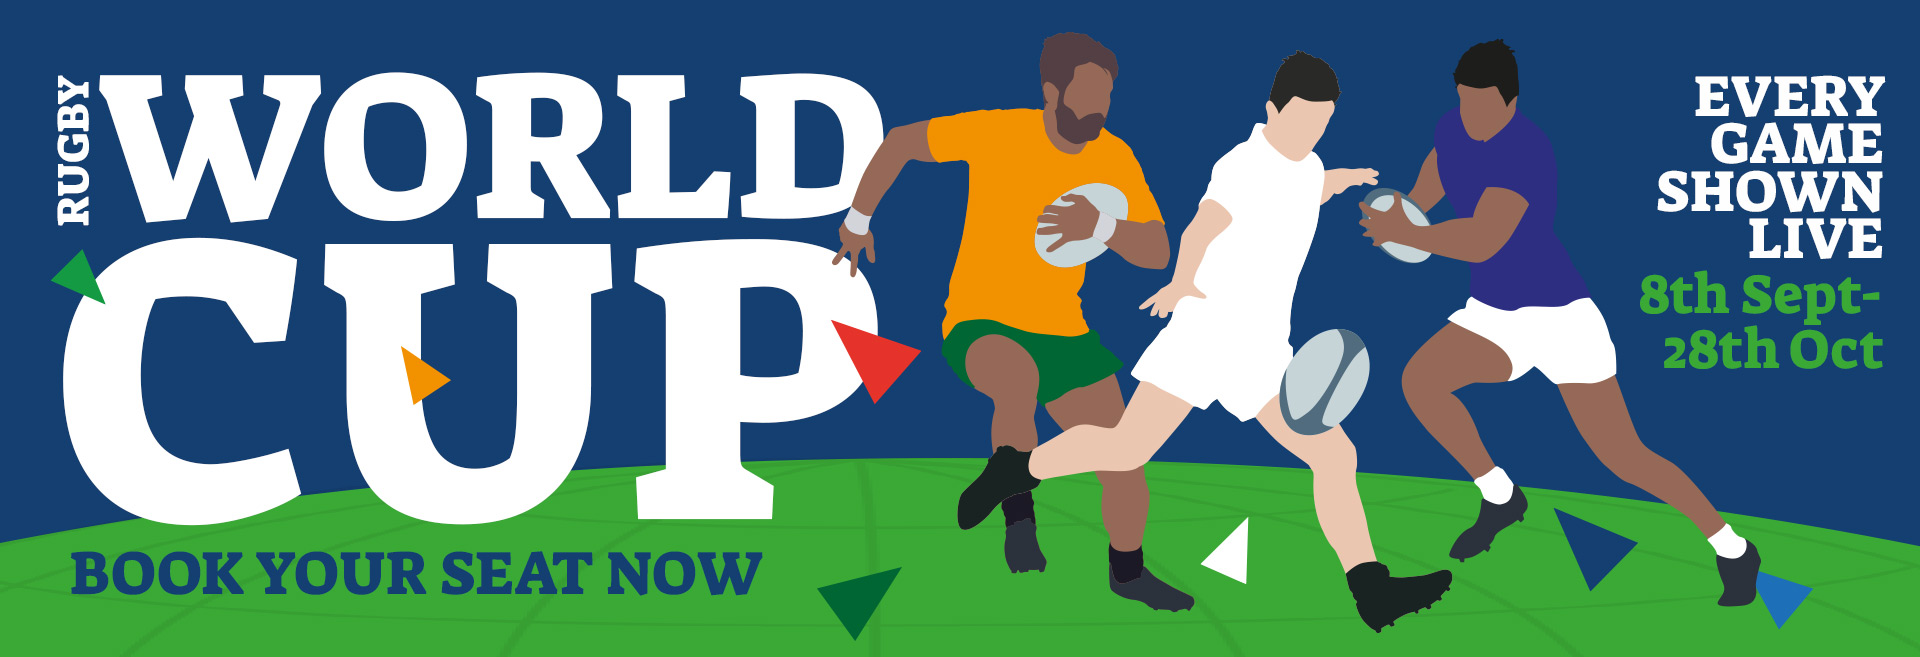 Watch the Rugby World Cup at The Washington